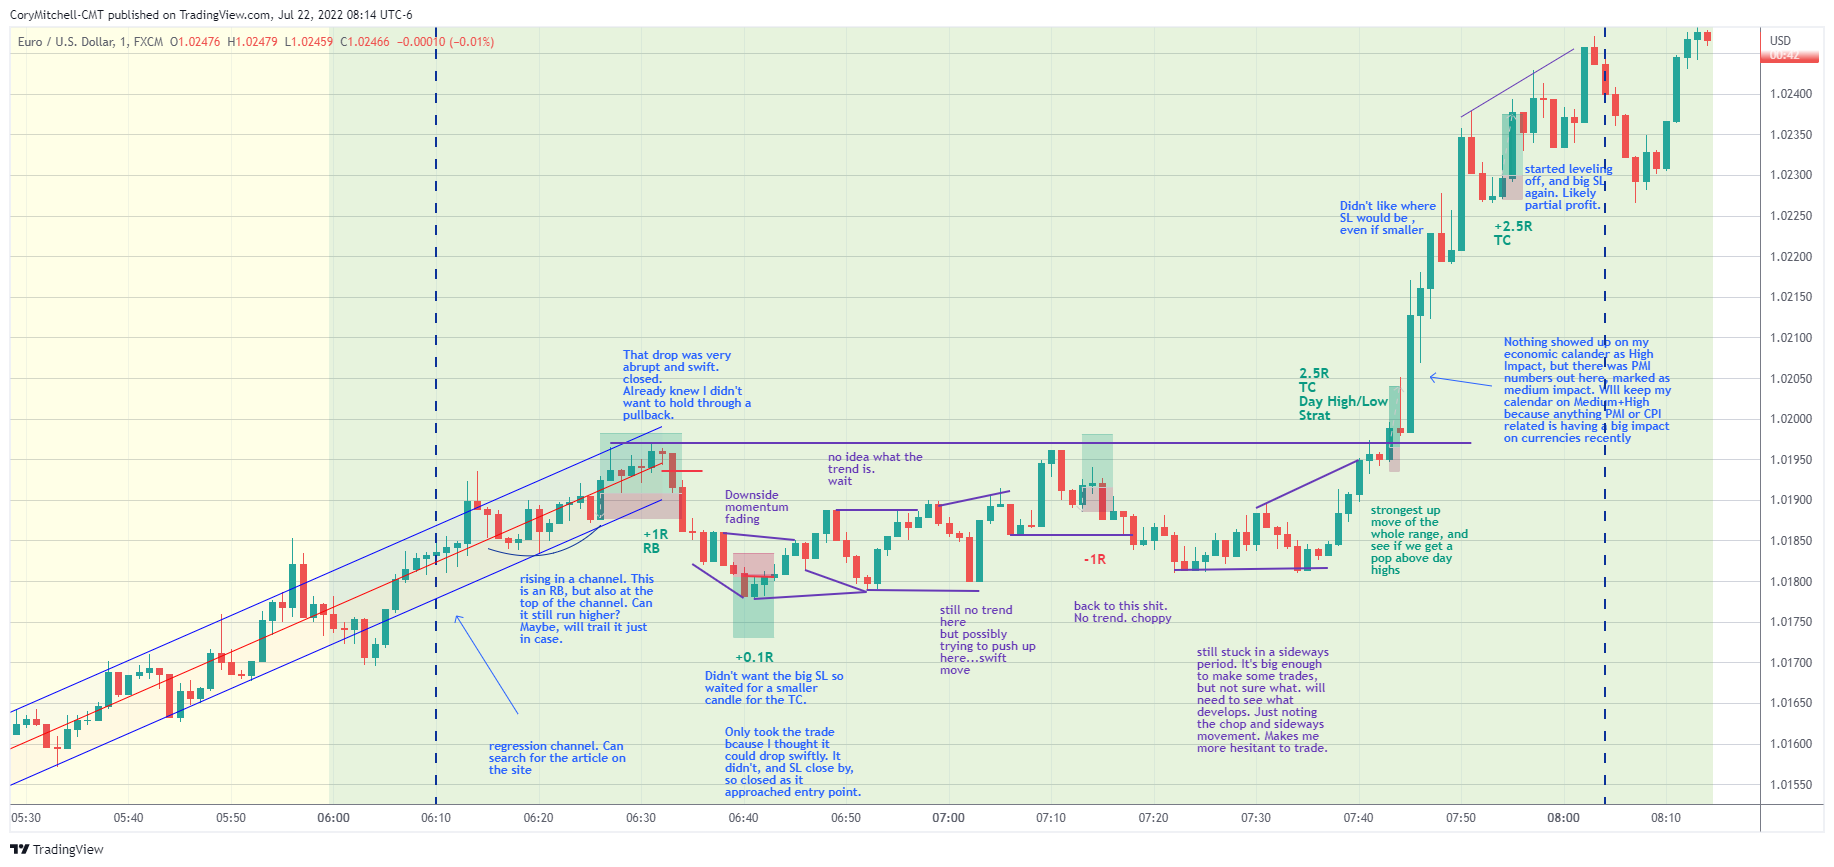 EURUSD day trading strategy examples July 22